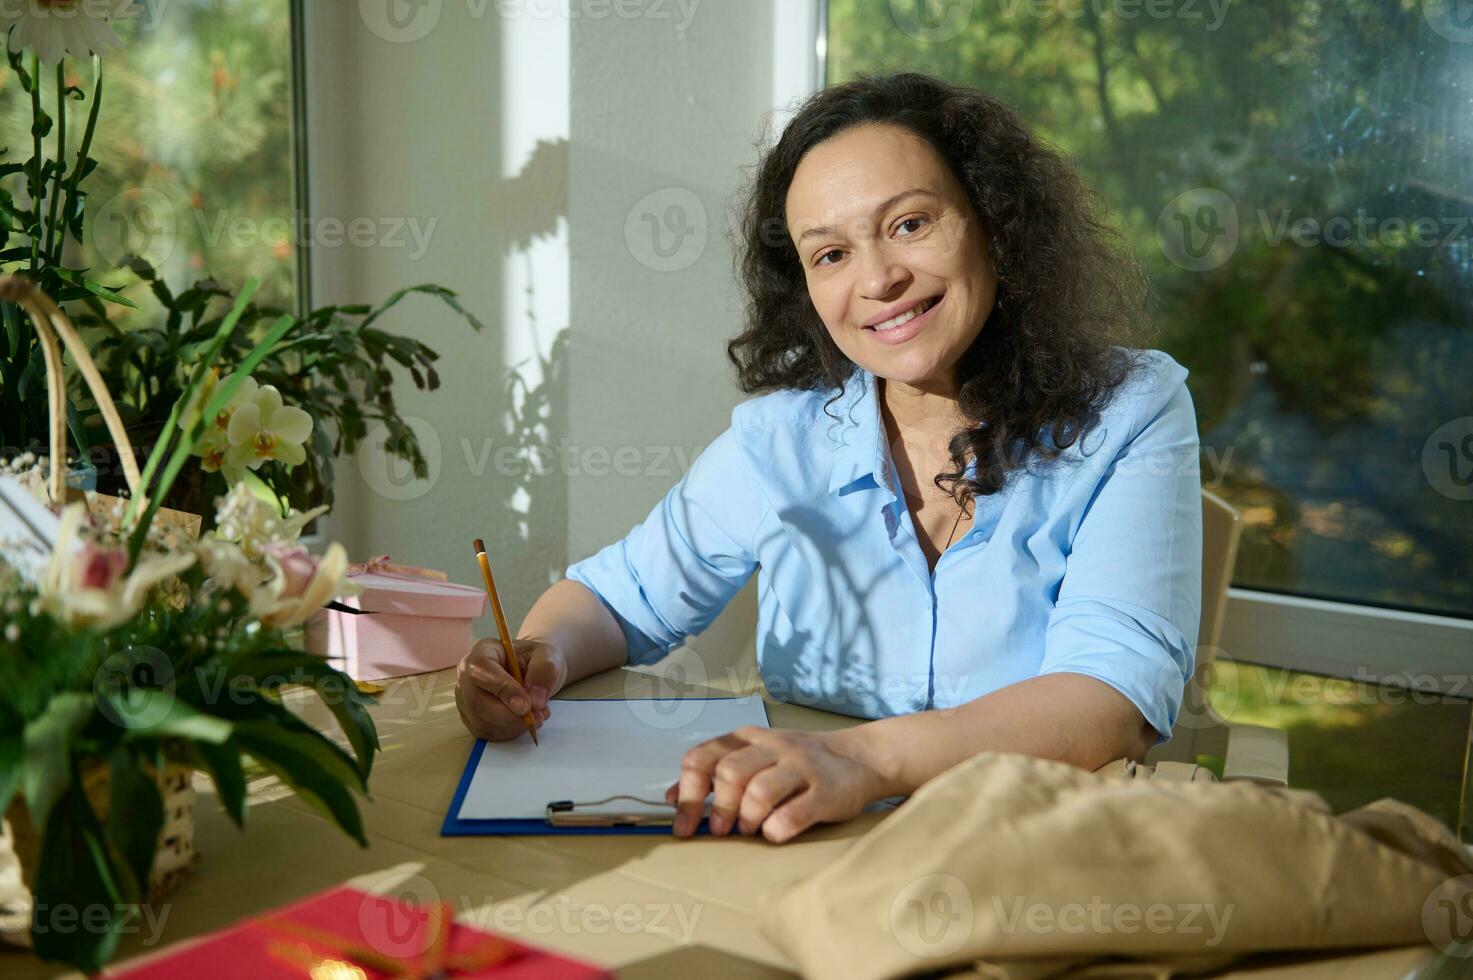 Multi-ethnic charming woman working in a floral shop, sitting at table and writing down notes, smiling looking at camera photo